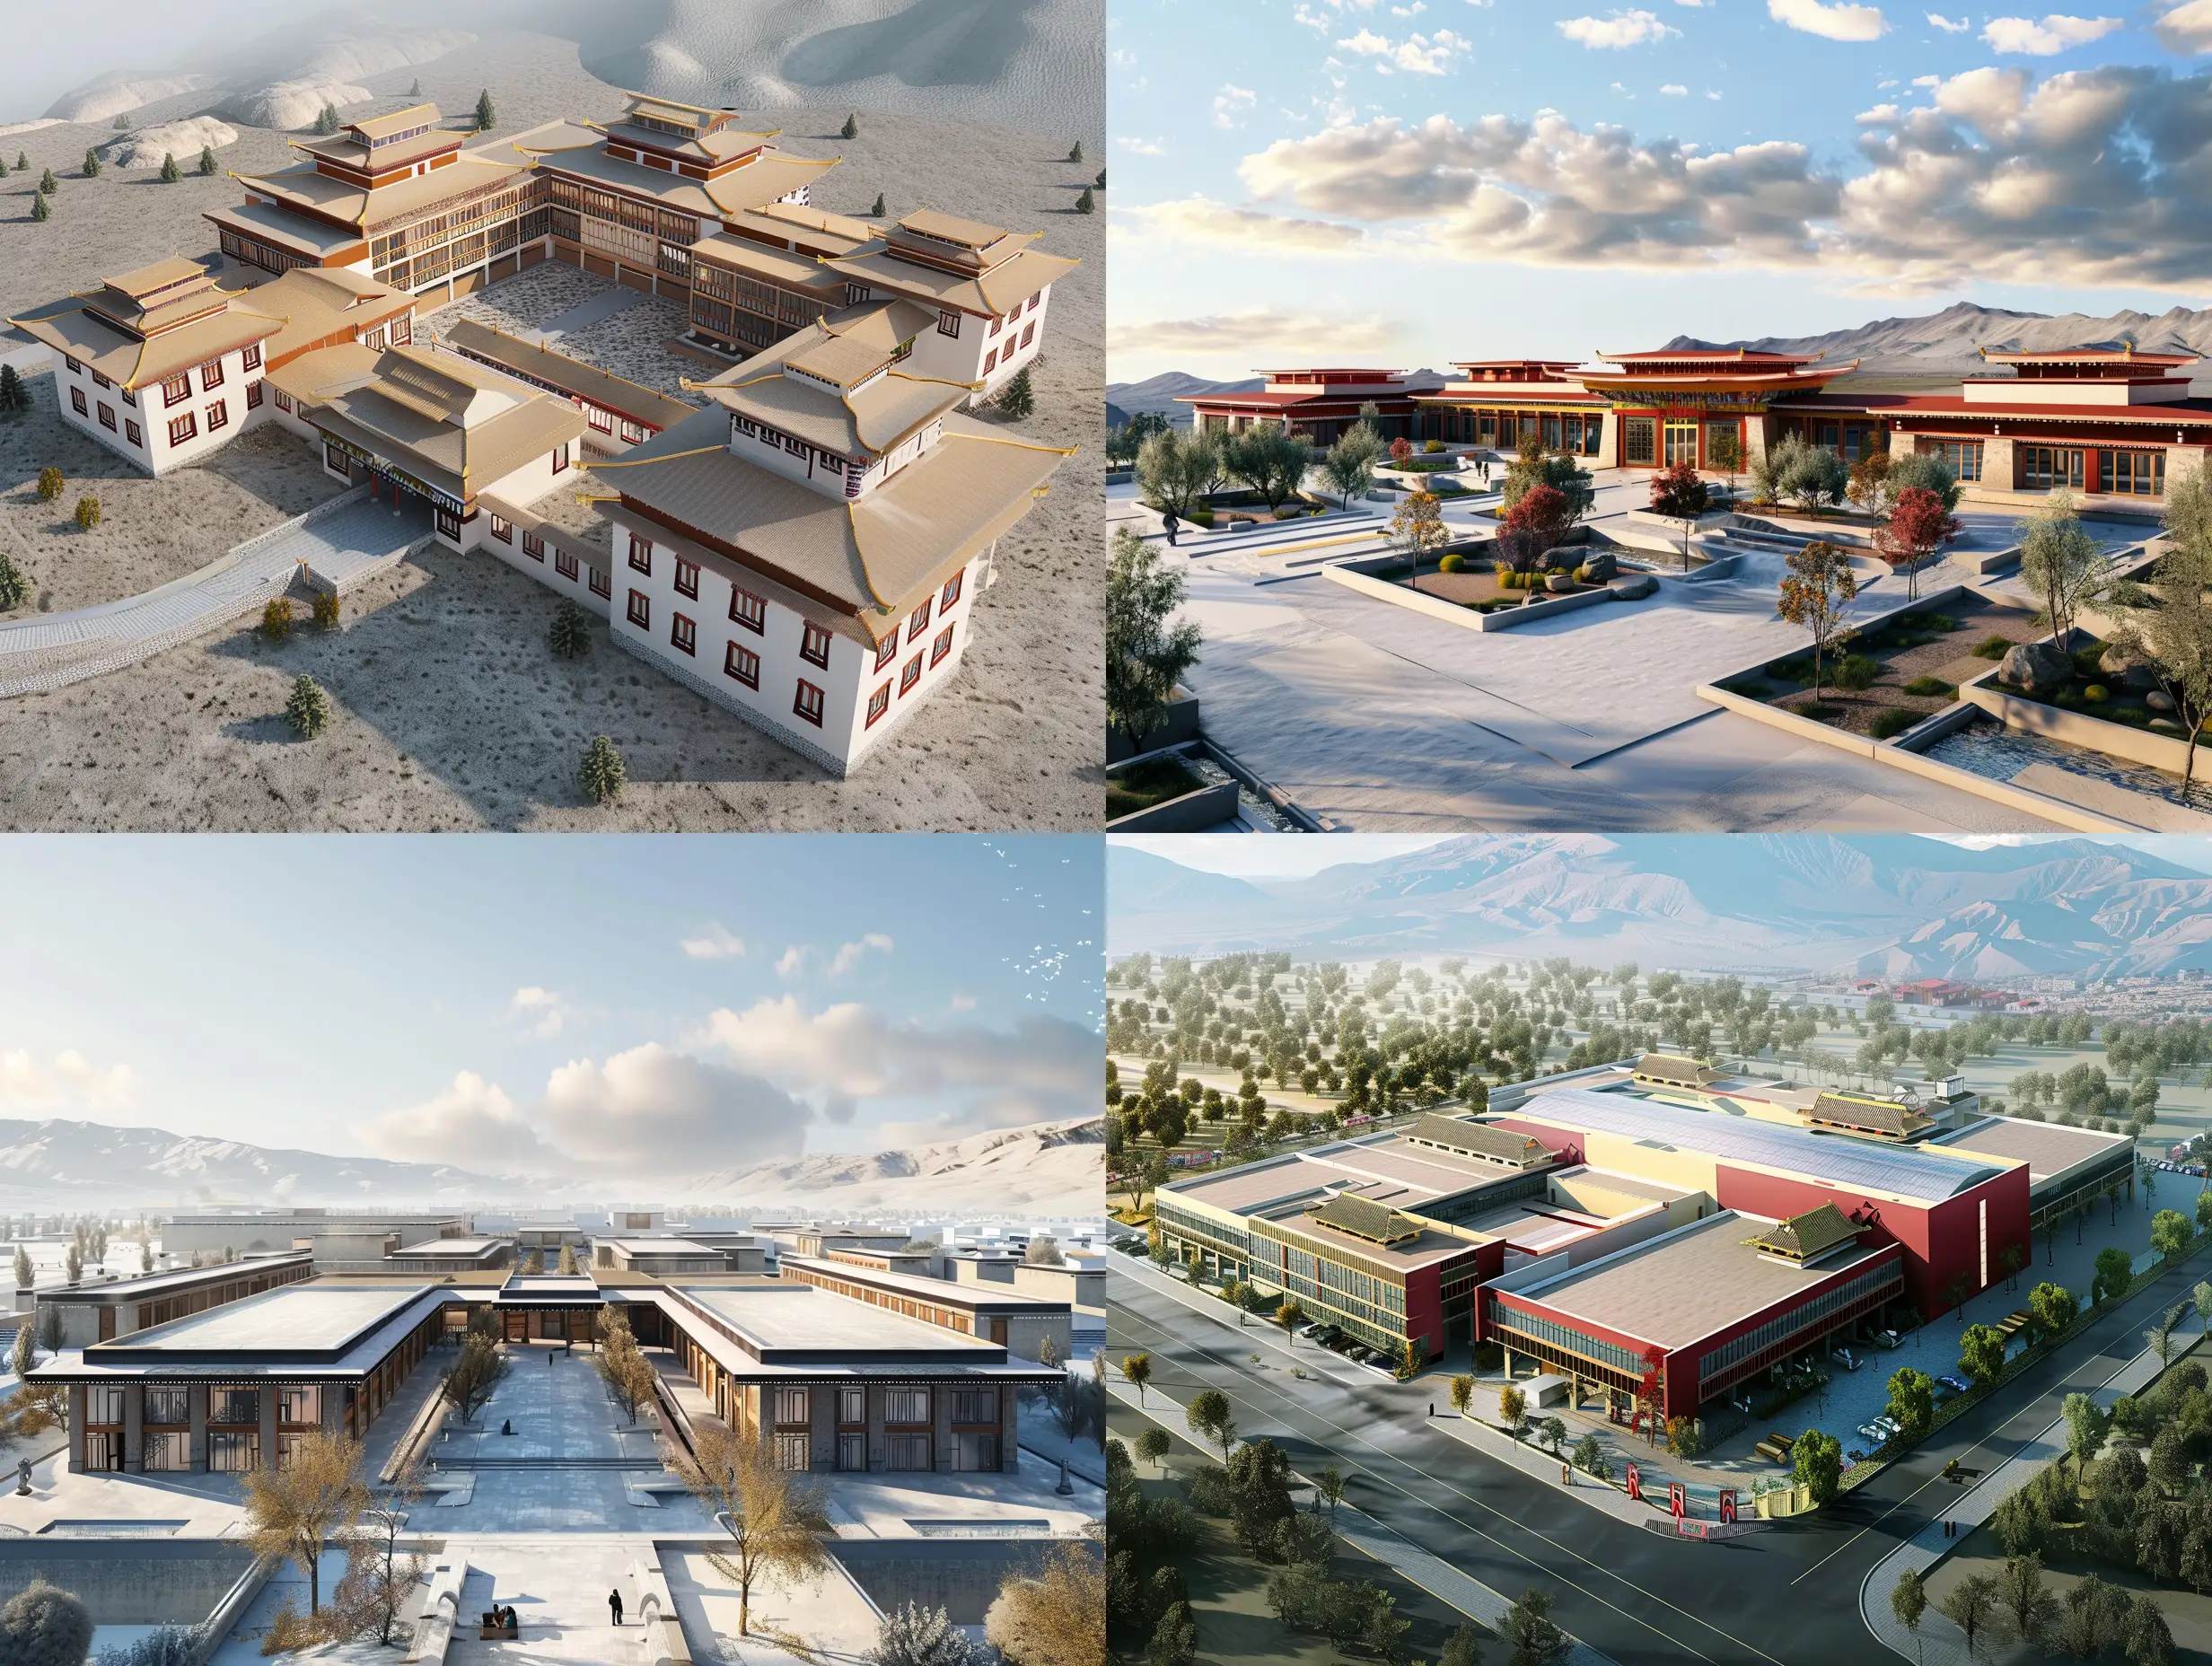 Realistic-Tibetan-Architecture-Commercial-Buildings-with-Flat-Roofs-in-High-Definition